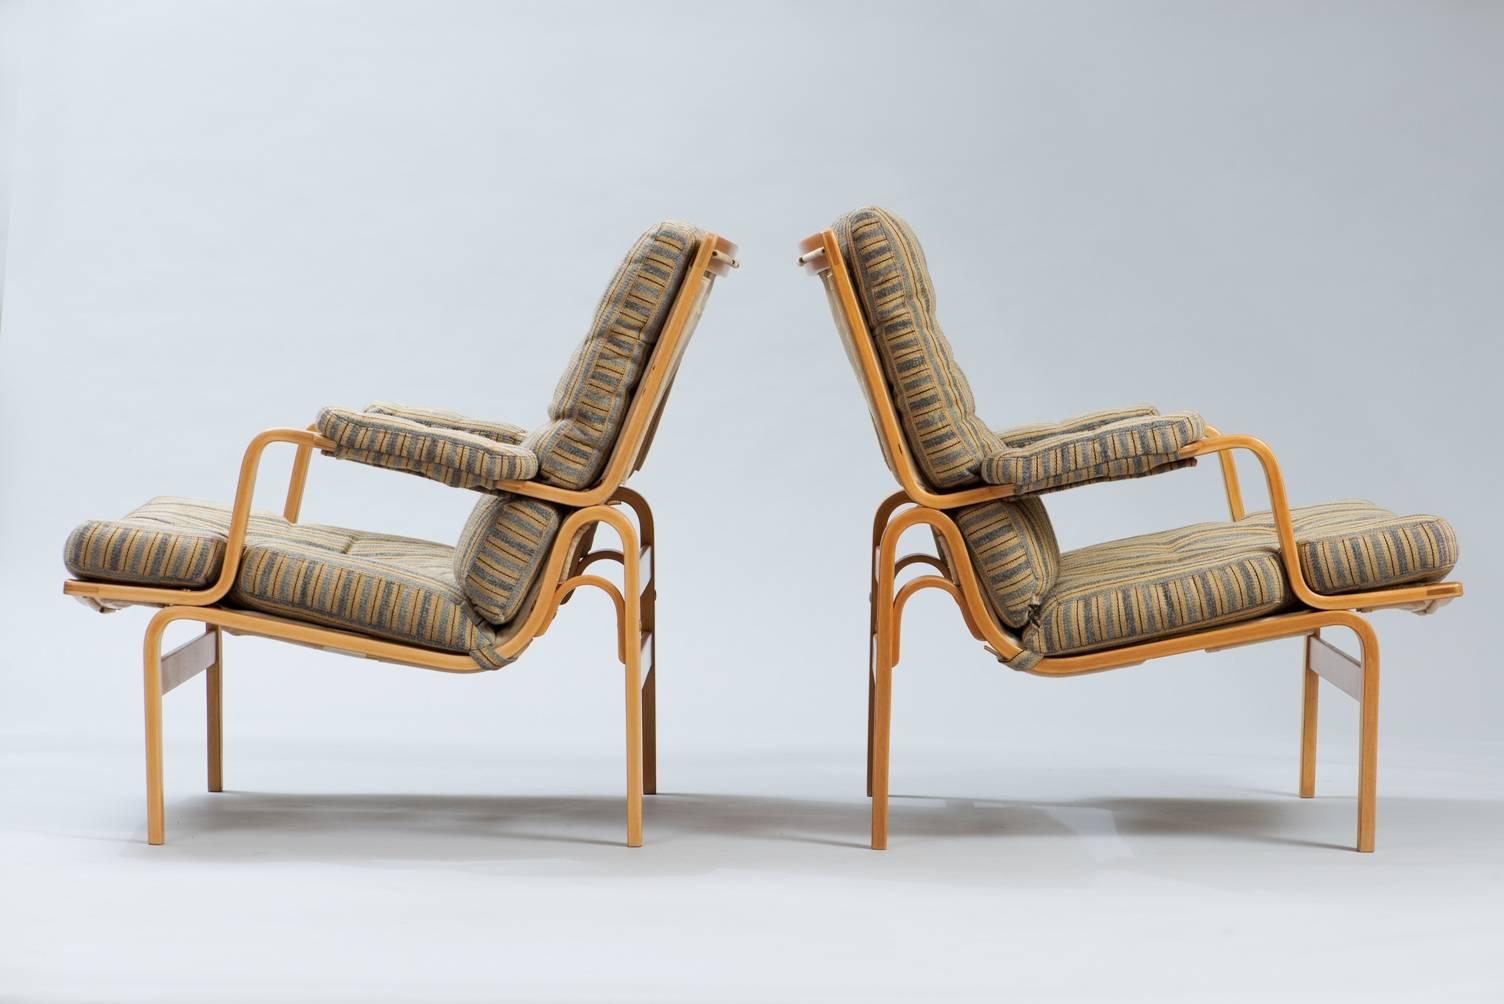 Pair of  ”Ingrid” lounge chairs in bent beech wood and original wooll fabric upholstery.
Producer: Dux